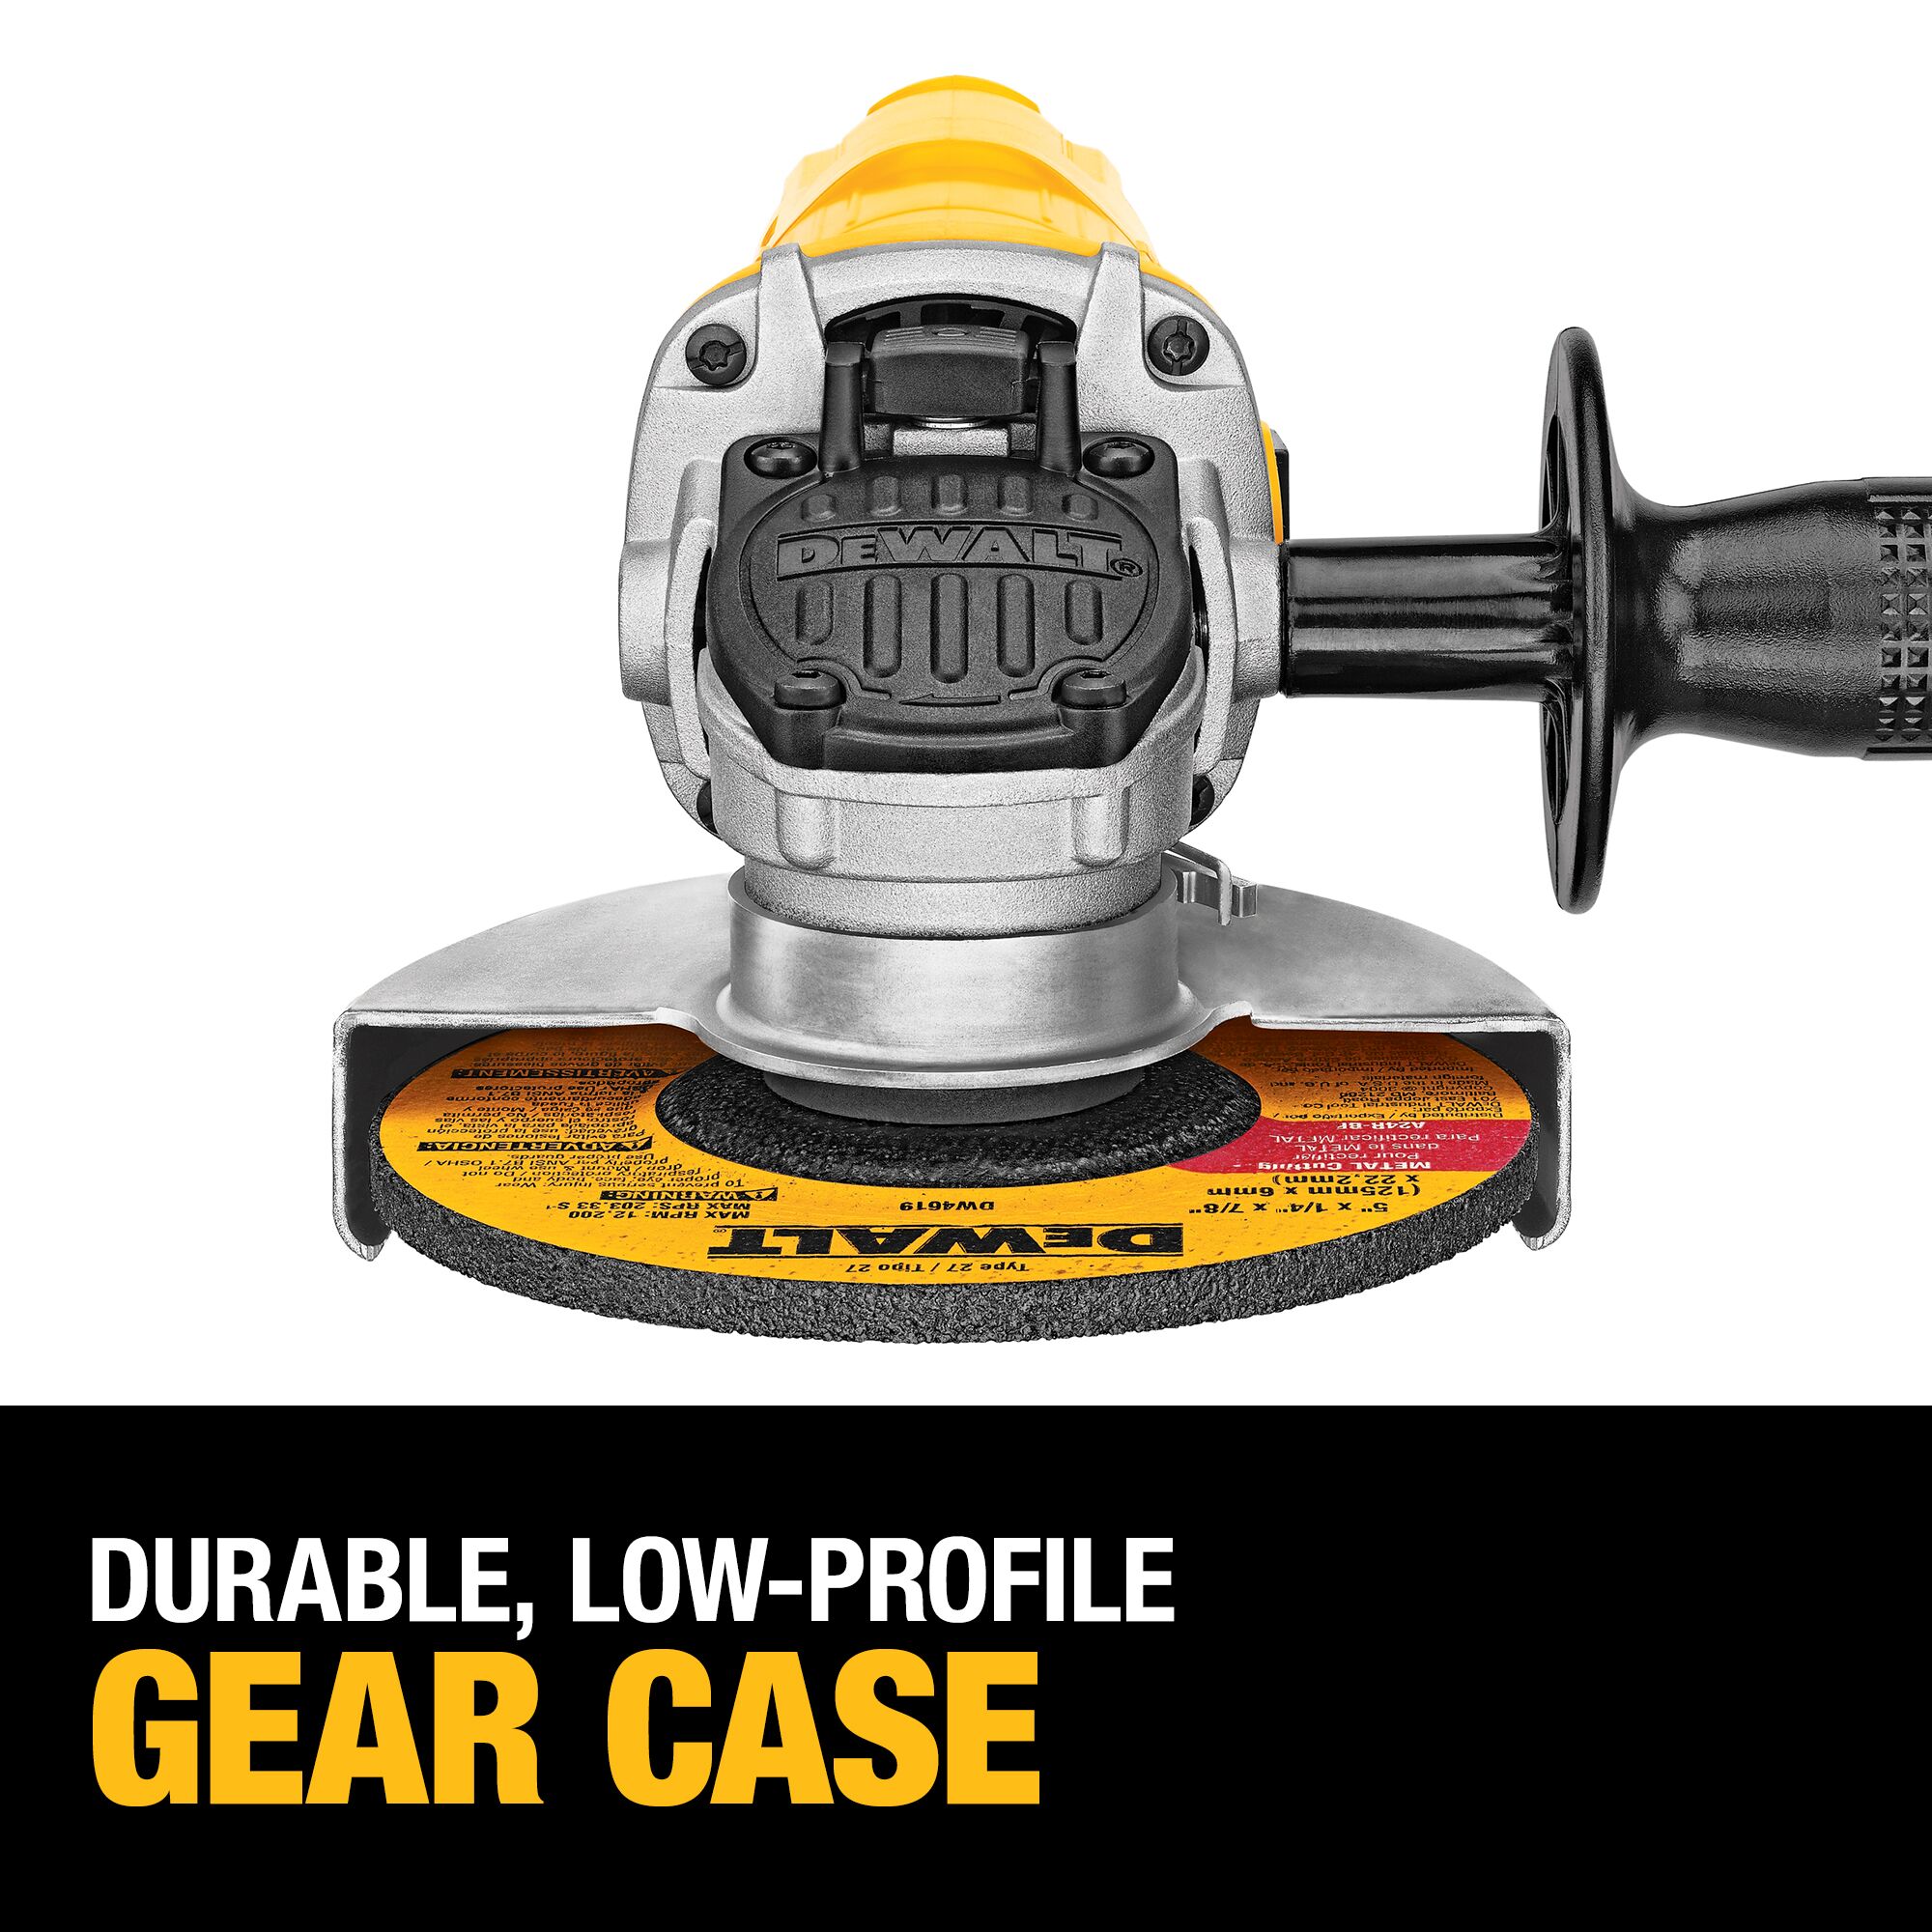 DEWALT 4.5-in-Amp Paddle Switch Corded Angle Grinder